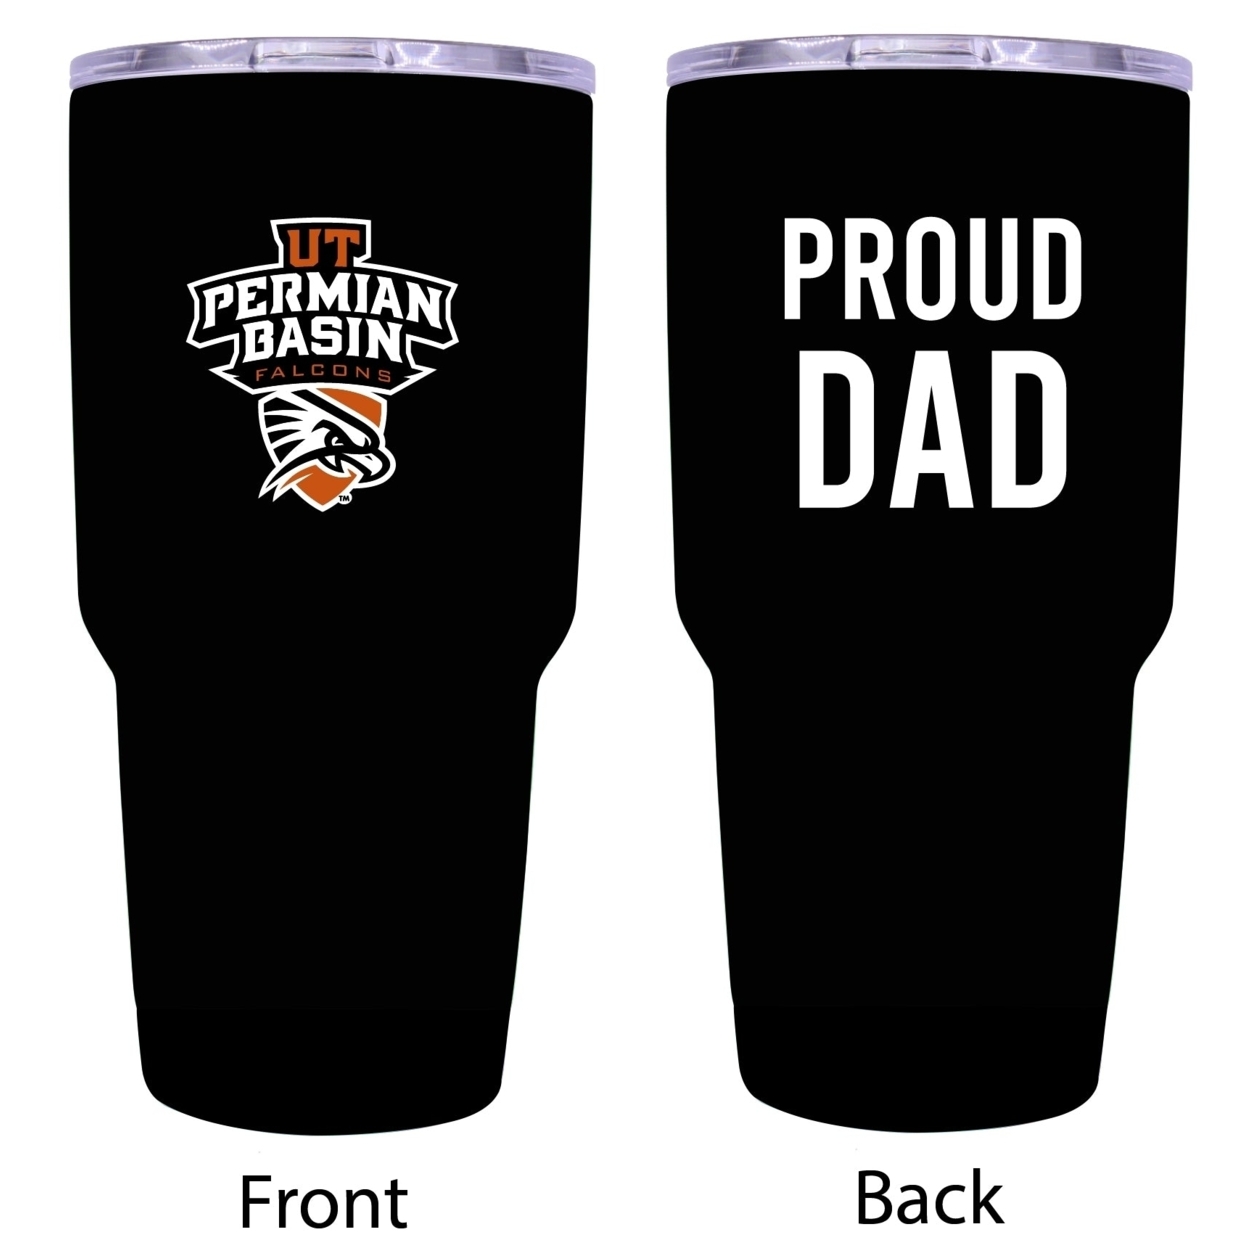 University Of Texas Of The Permian Basin Proud Dad 24 Oz Insulated Stainless Steel Tumblers Choose Your Color. - Black